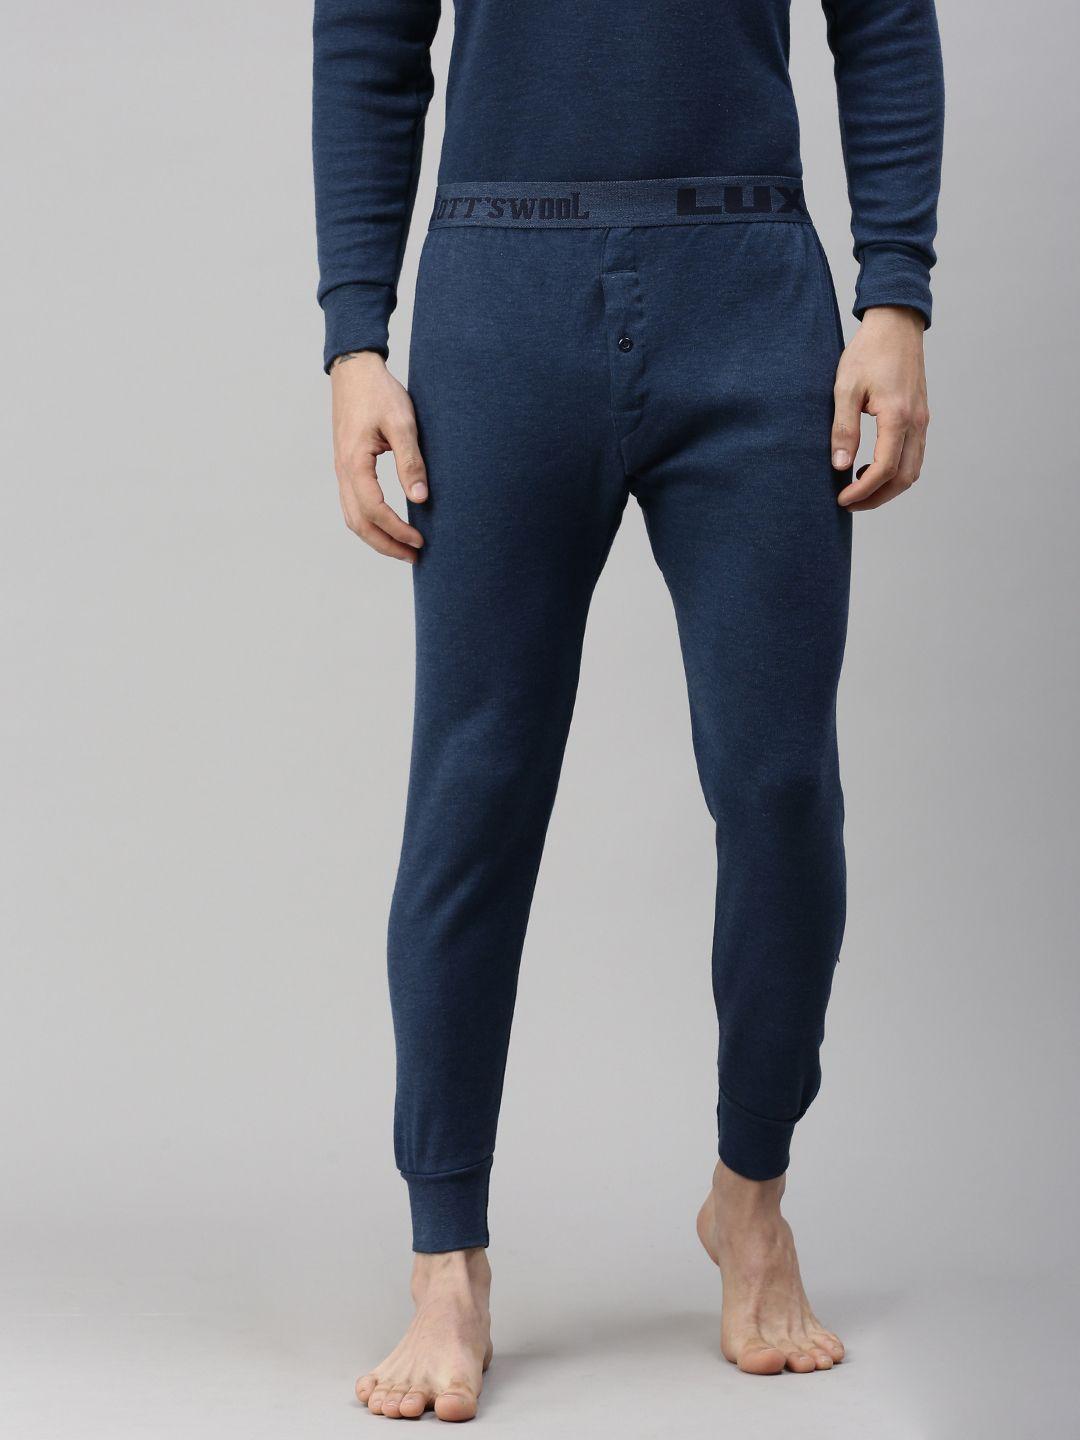 lux cottswool men blue solid cotton thermal bottoms